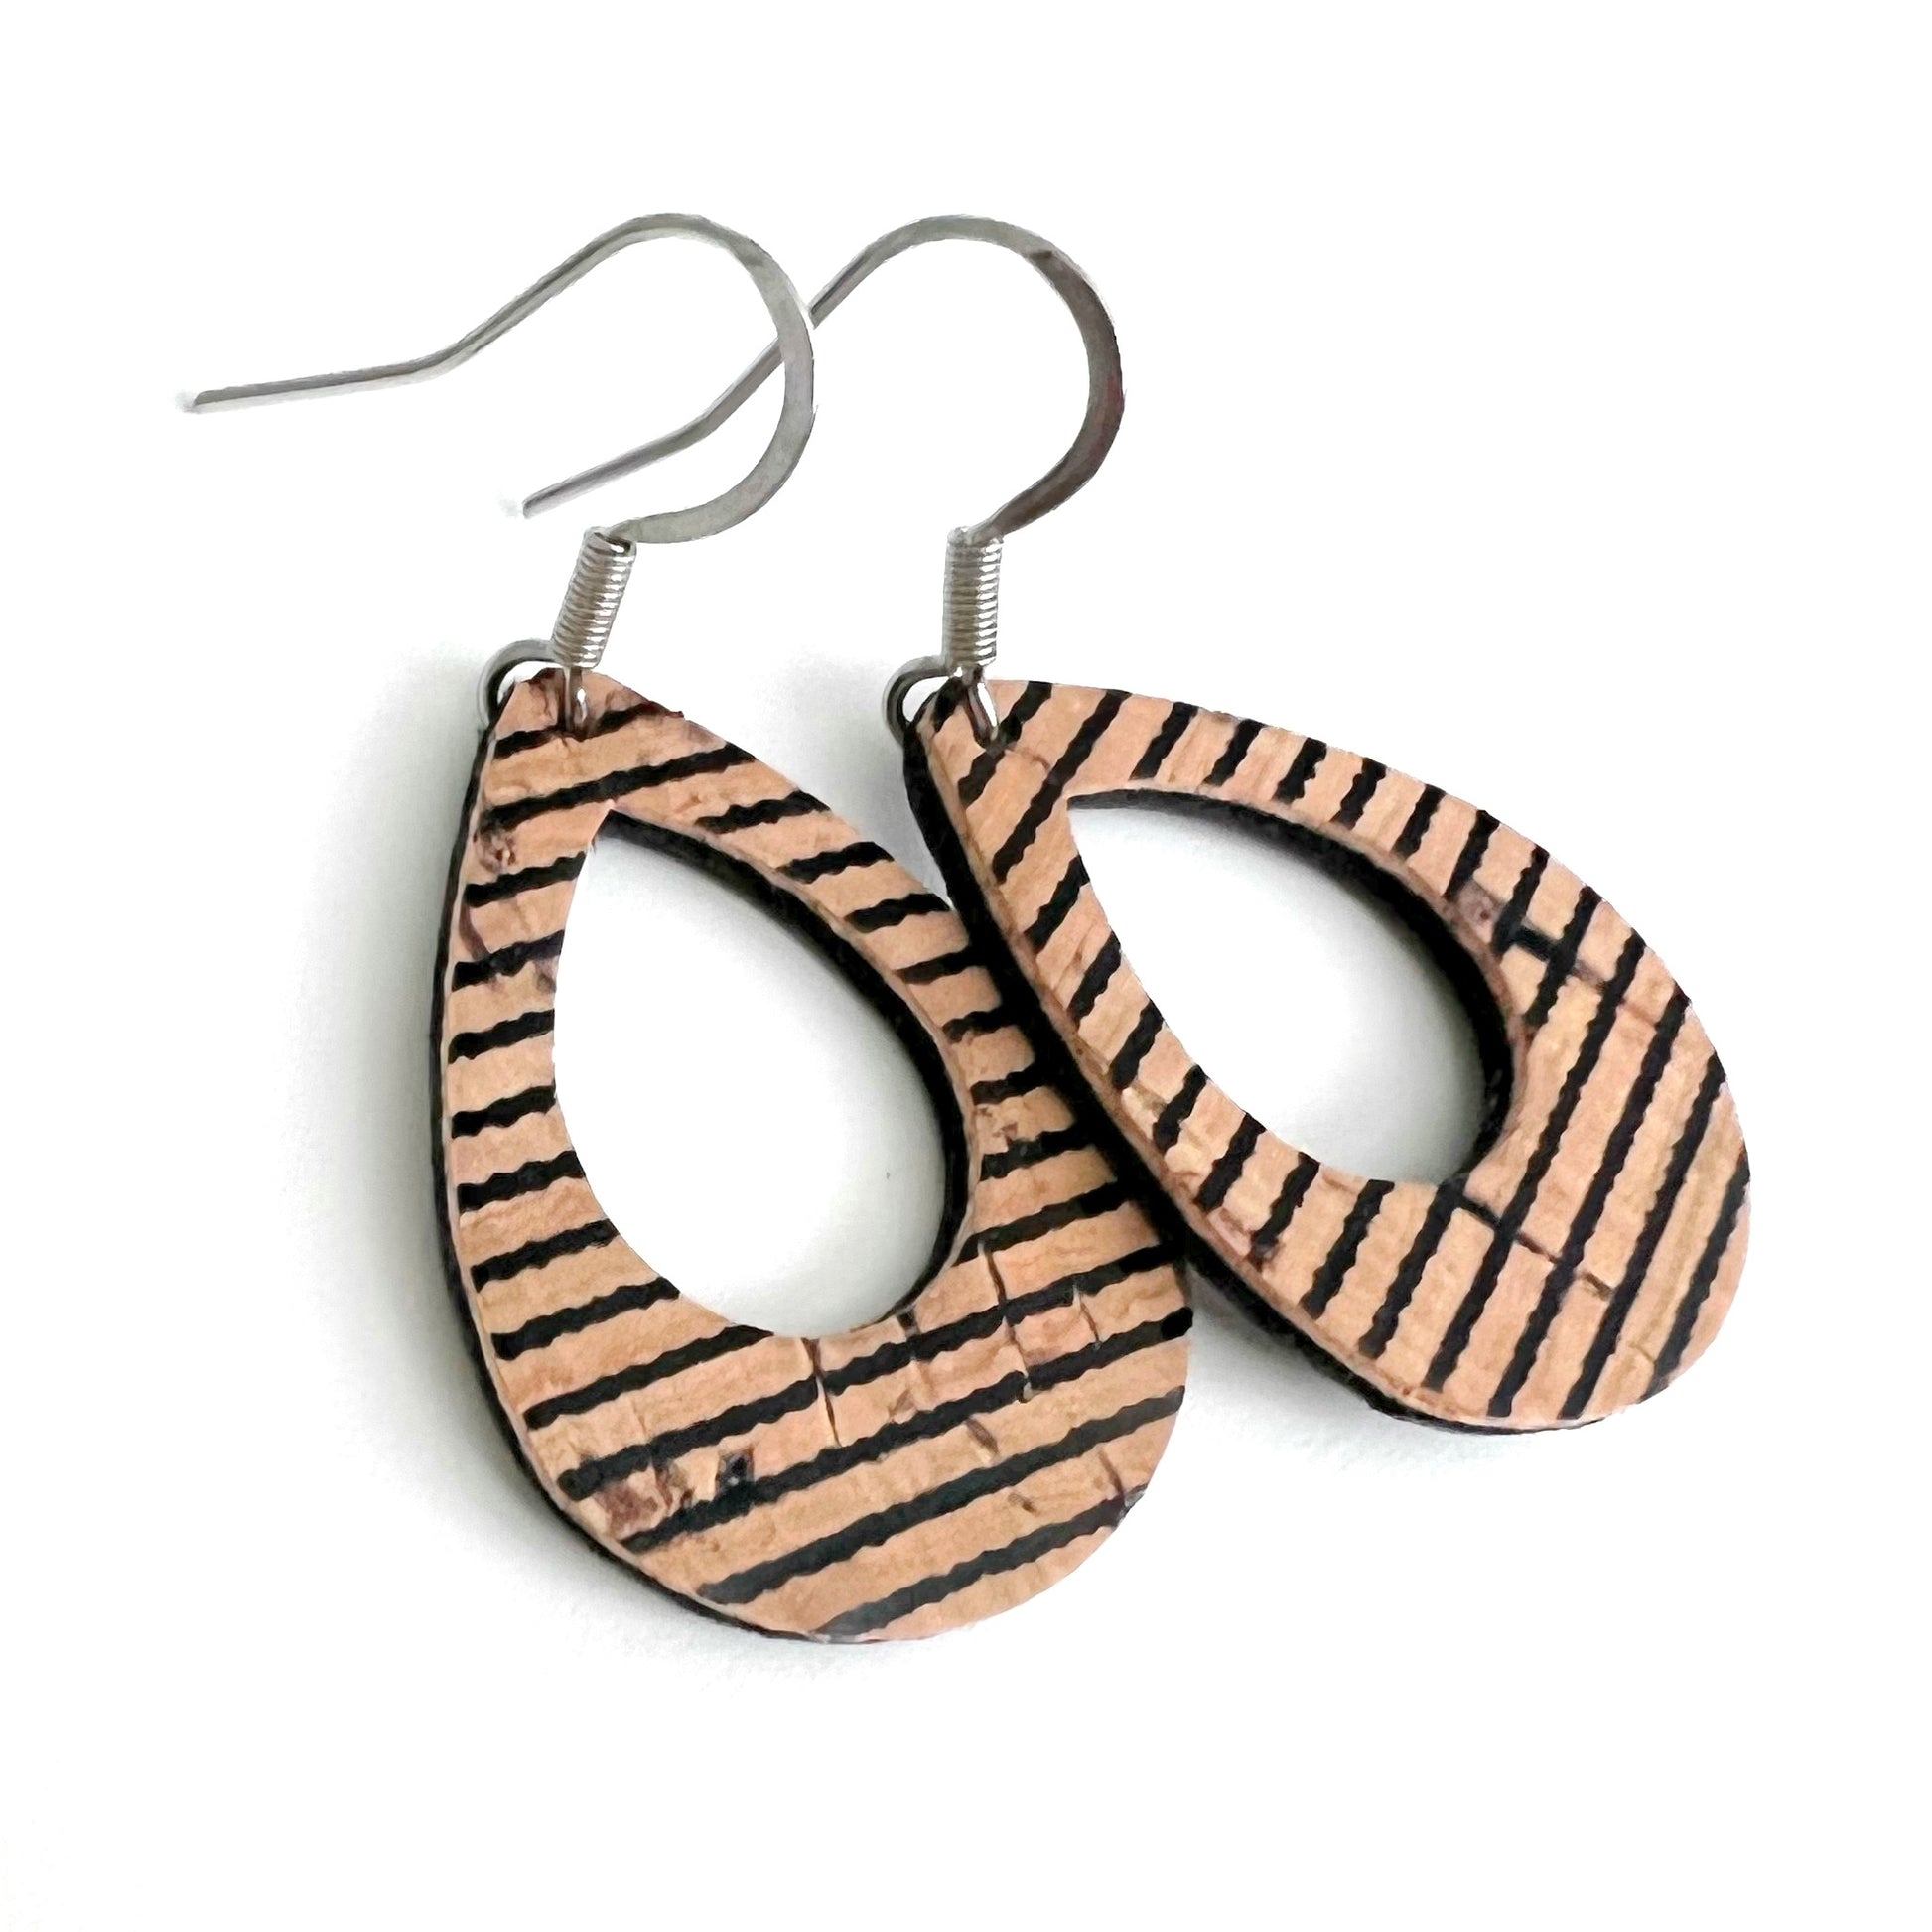 Mini Teardrop lightweight statement earrings with natural cork + leather and black pinstrip